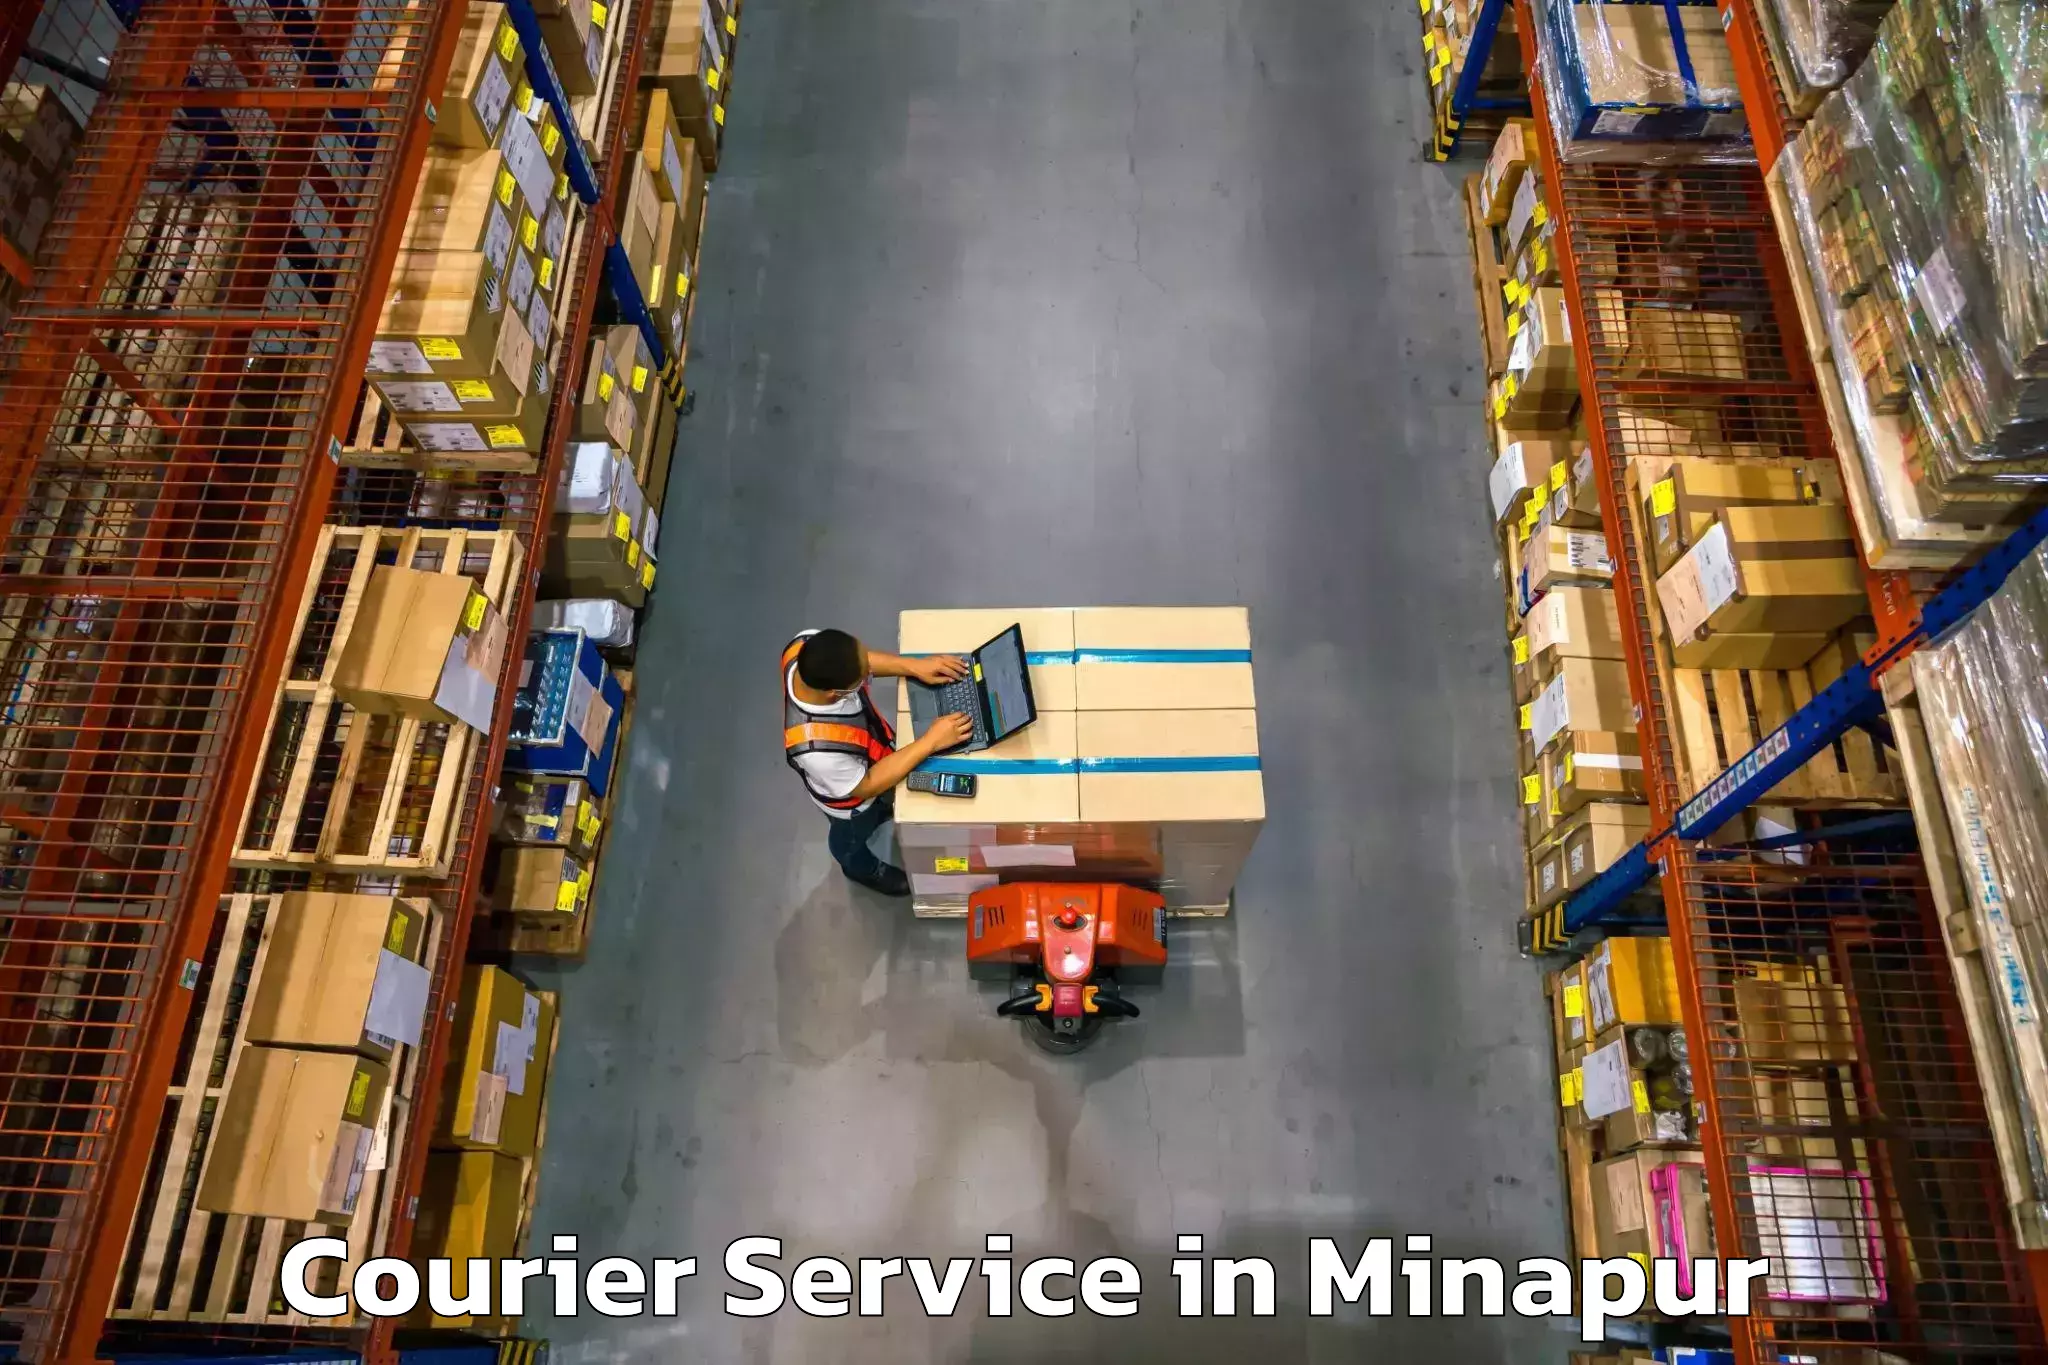 Business shipping needs in Minapur